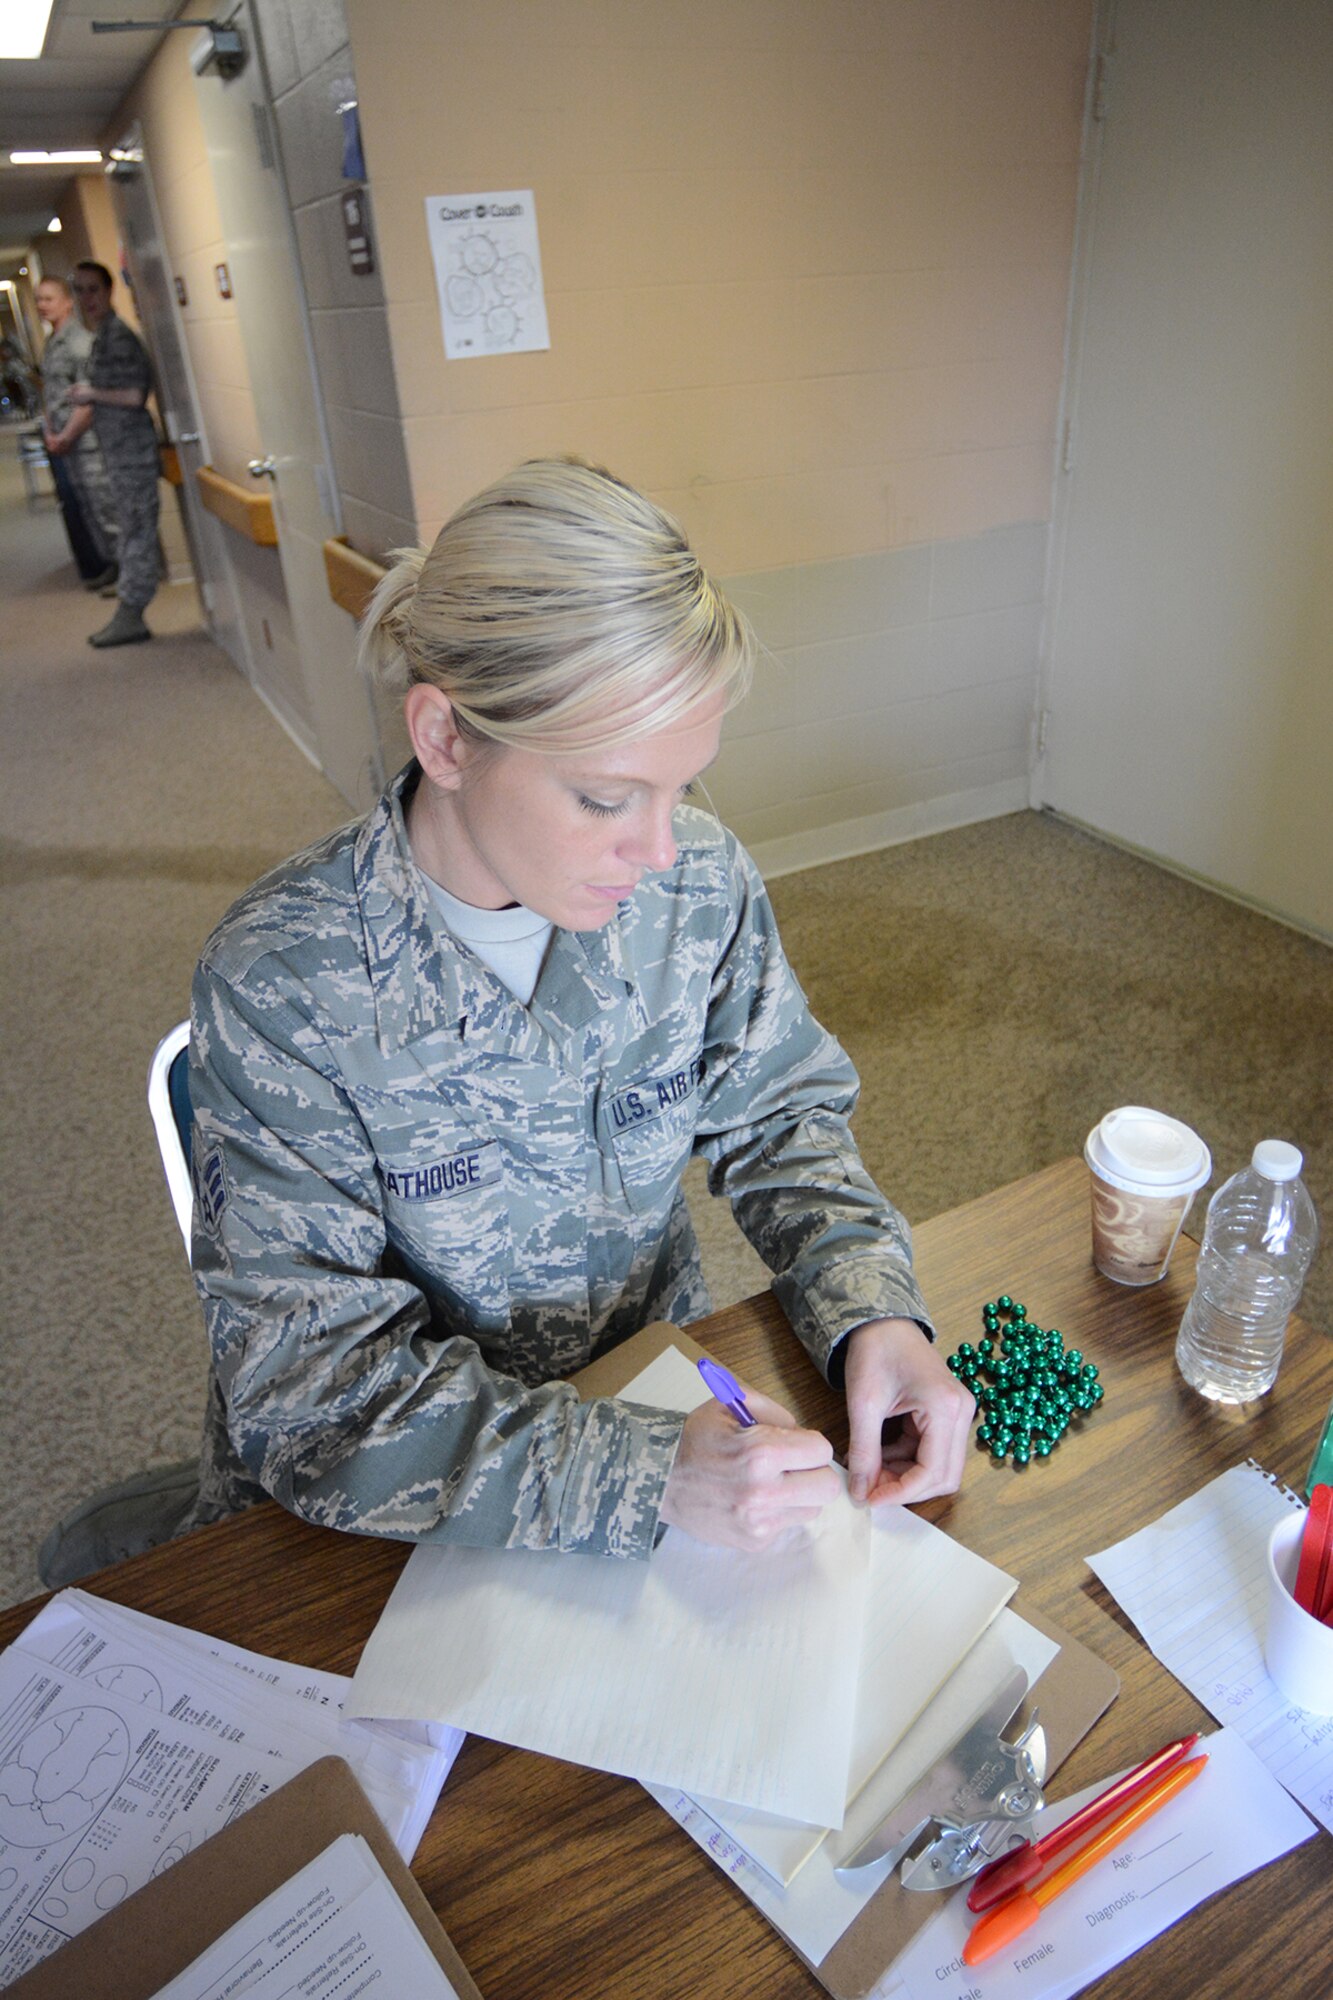 Senior Airman Jackie Greathouse, 115th Medical Group medical technician, checks medical patients in during Cajun Care 2014 in Abbeville, La., March 2, 2014. During the 10-day mission, residents of Abbeville, La., and the surrounding areas could receive free optometry, dental and medical services from Air National Guard and Navy personnel. (Air National Guard photo by Senior Airman Andrea F. Liechti)